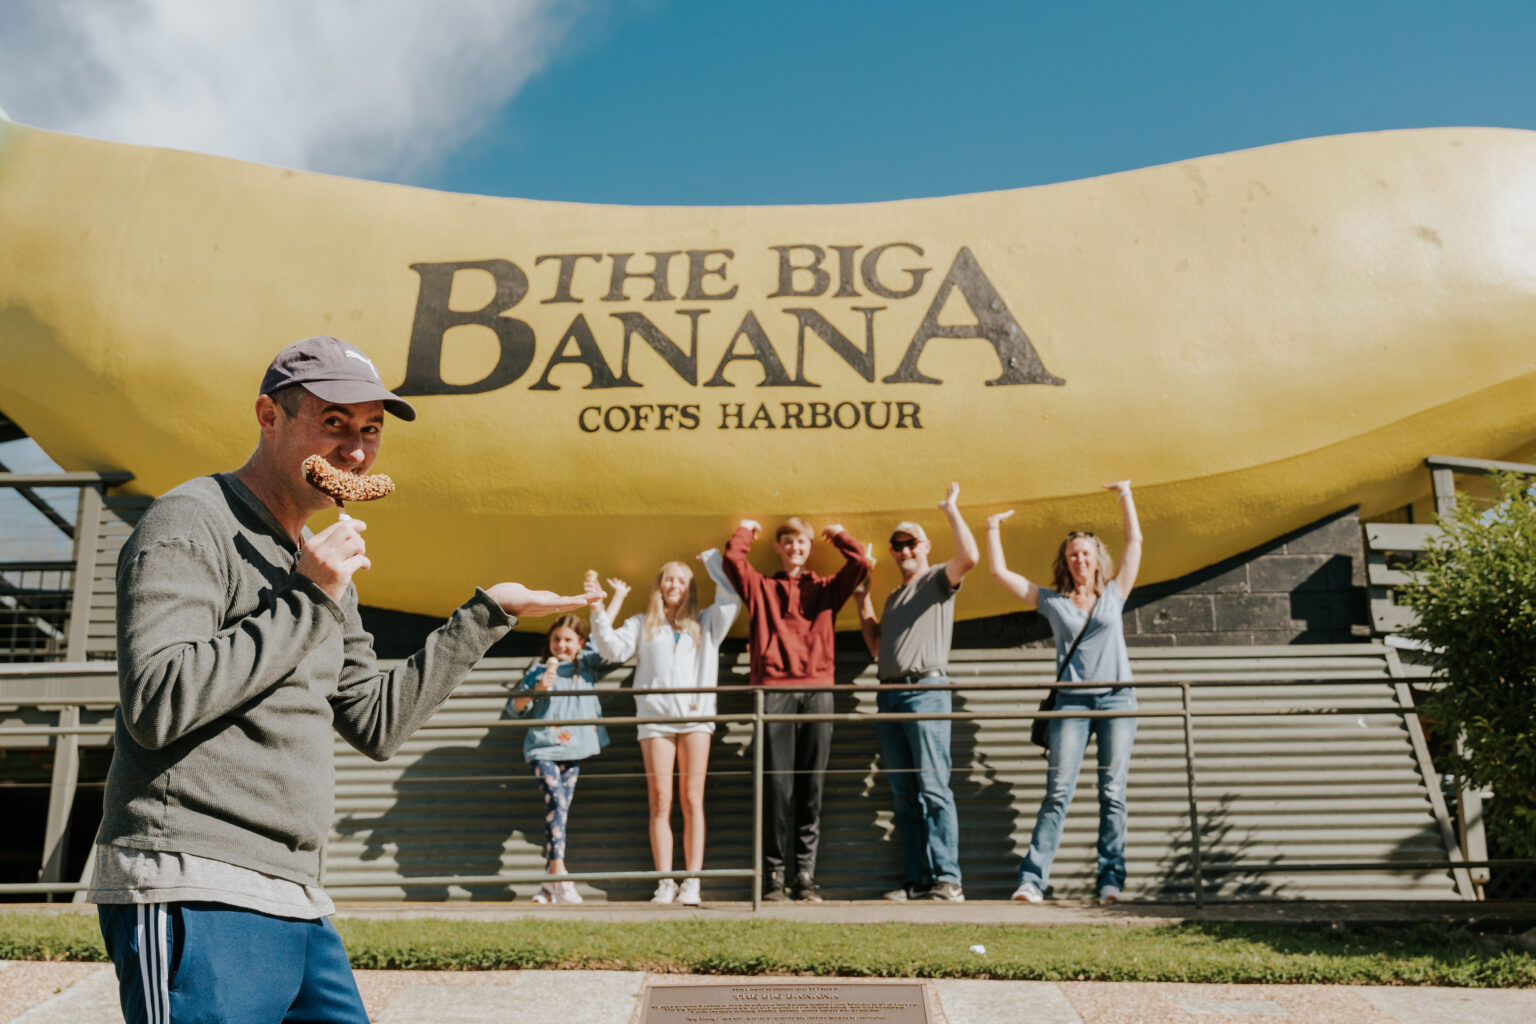 Make Sure You Get Your Photo In Front Of The Iconic Big Banana